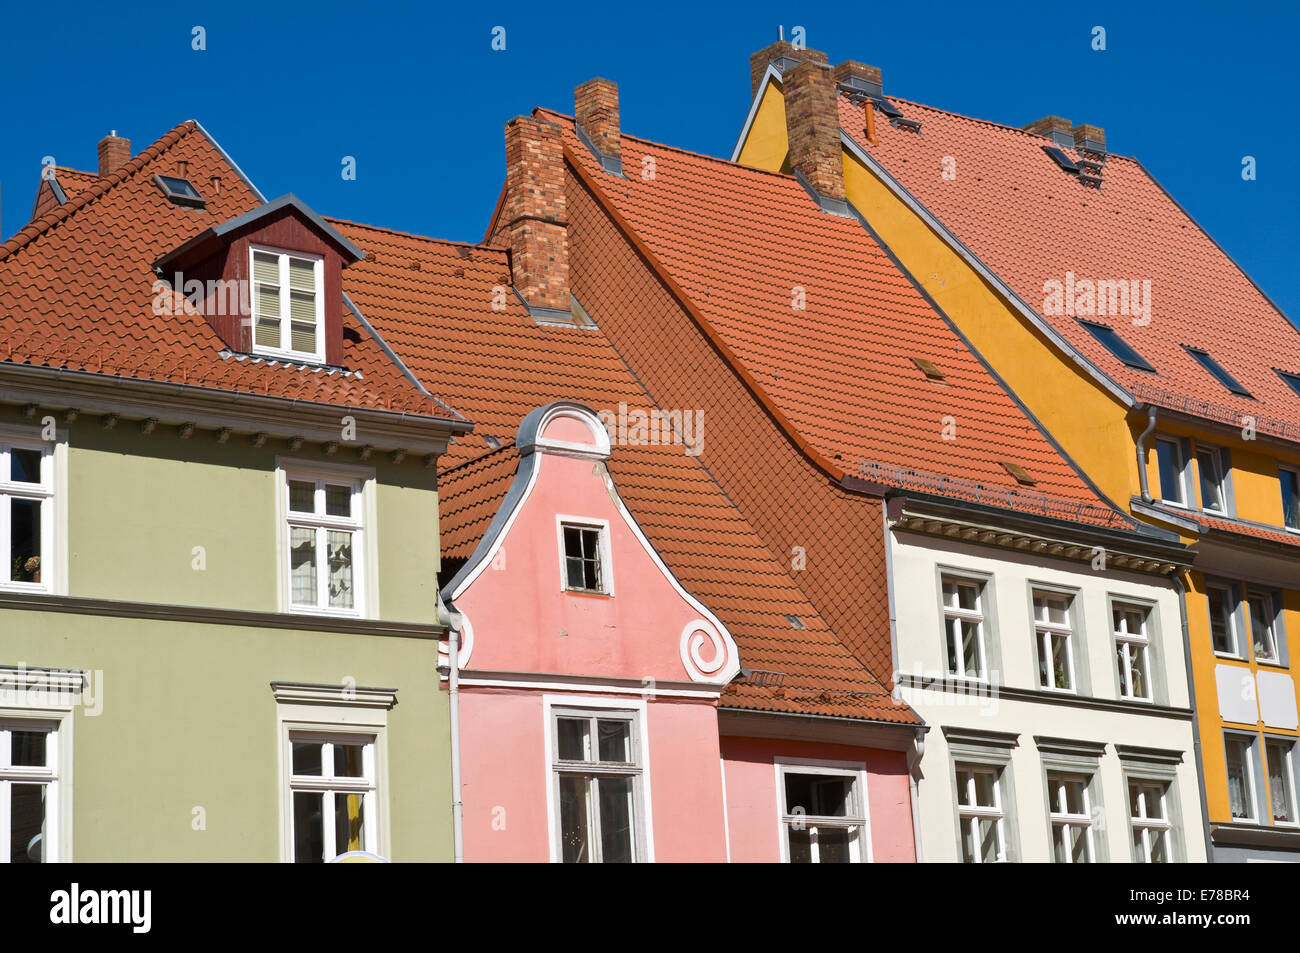 Roofs in the historic Old Town of Stralsund, Mecklenburg Western Pomerania, Germany. Stock Photo